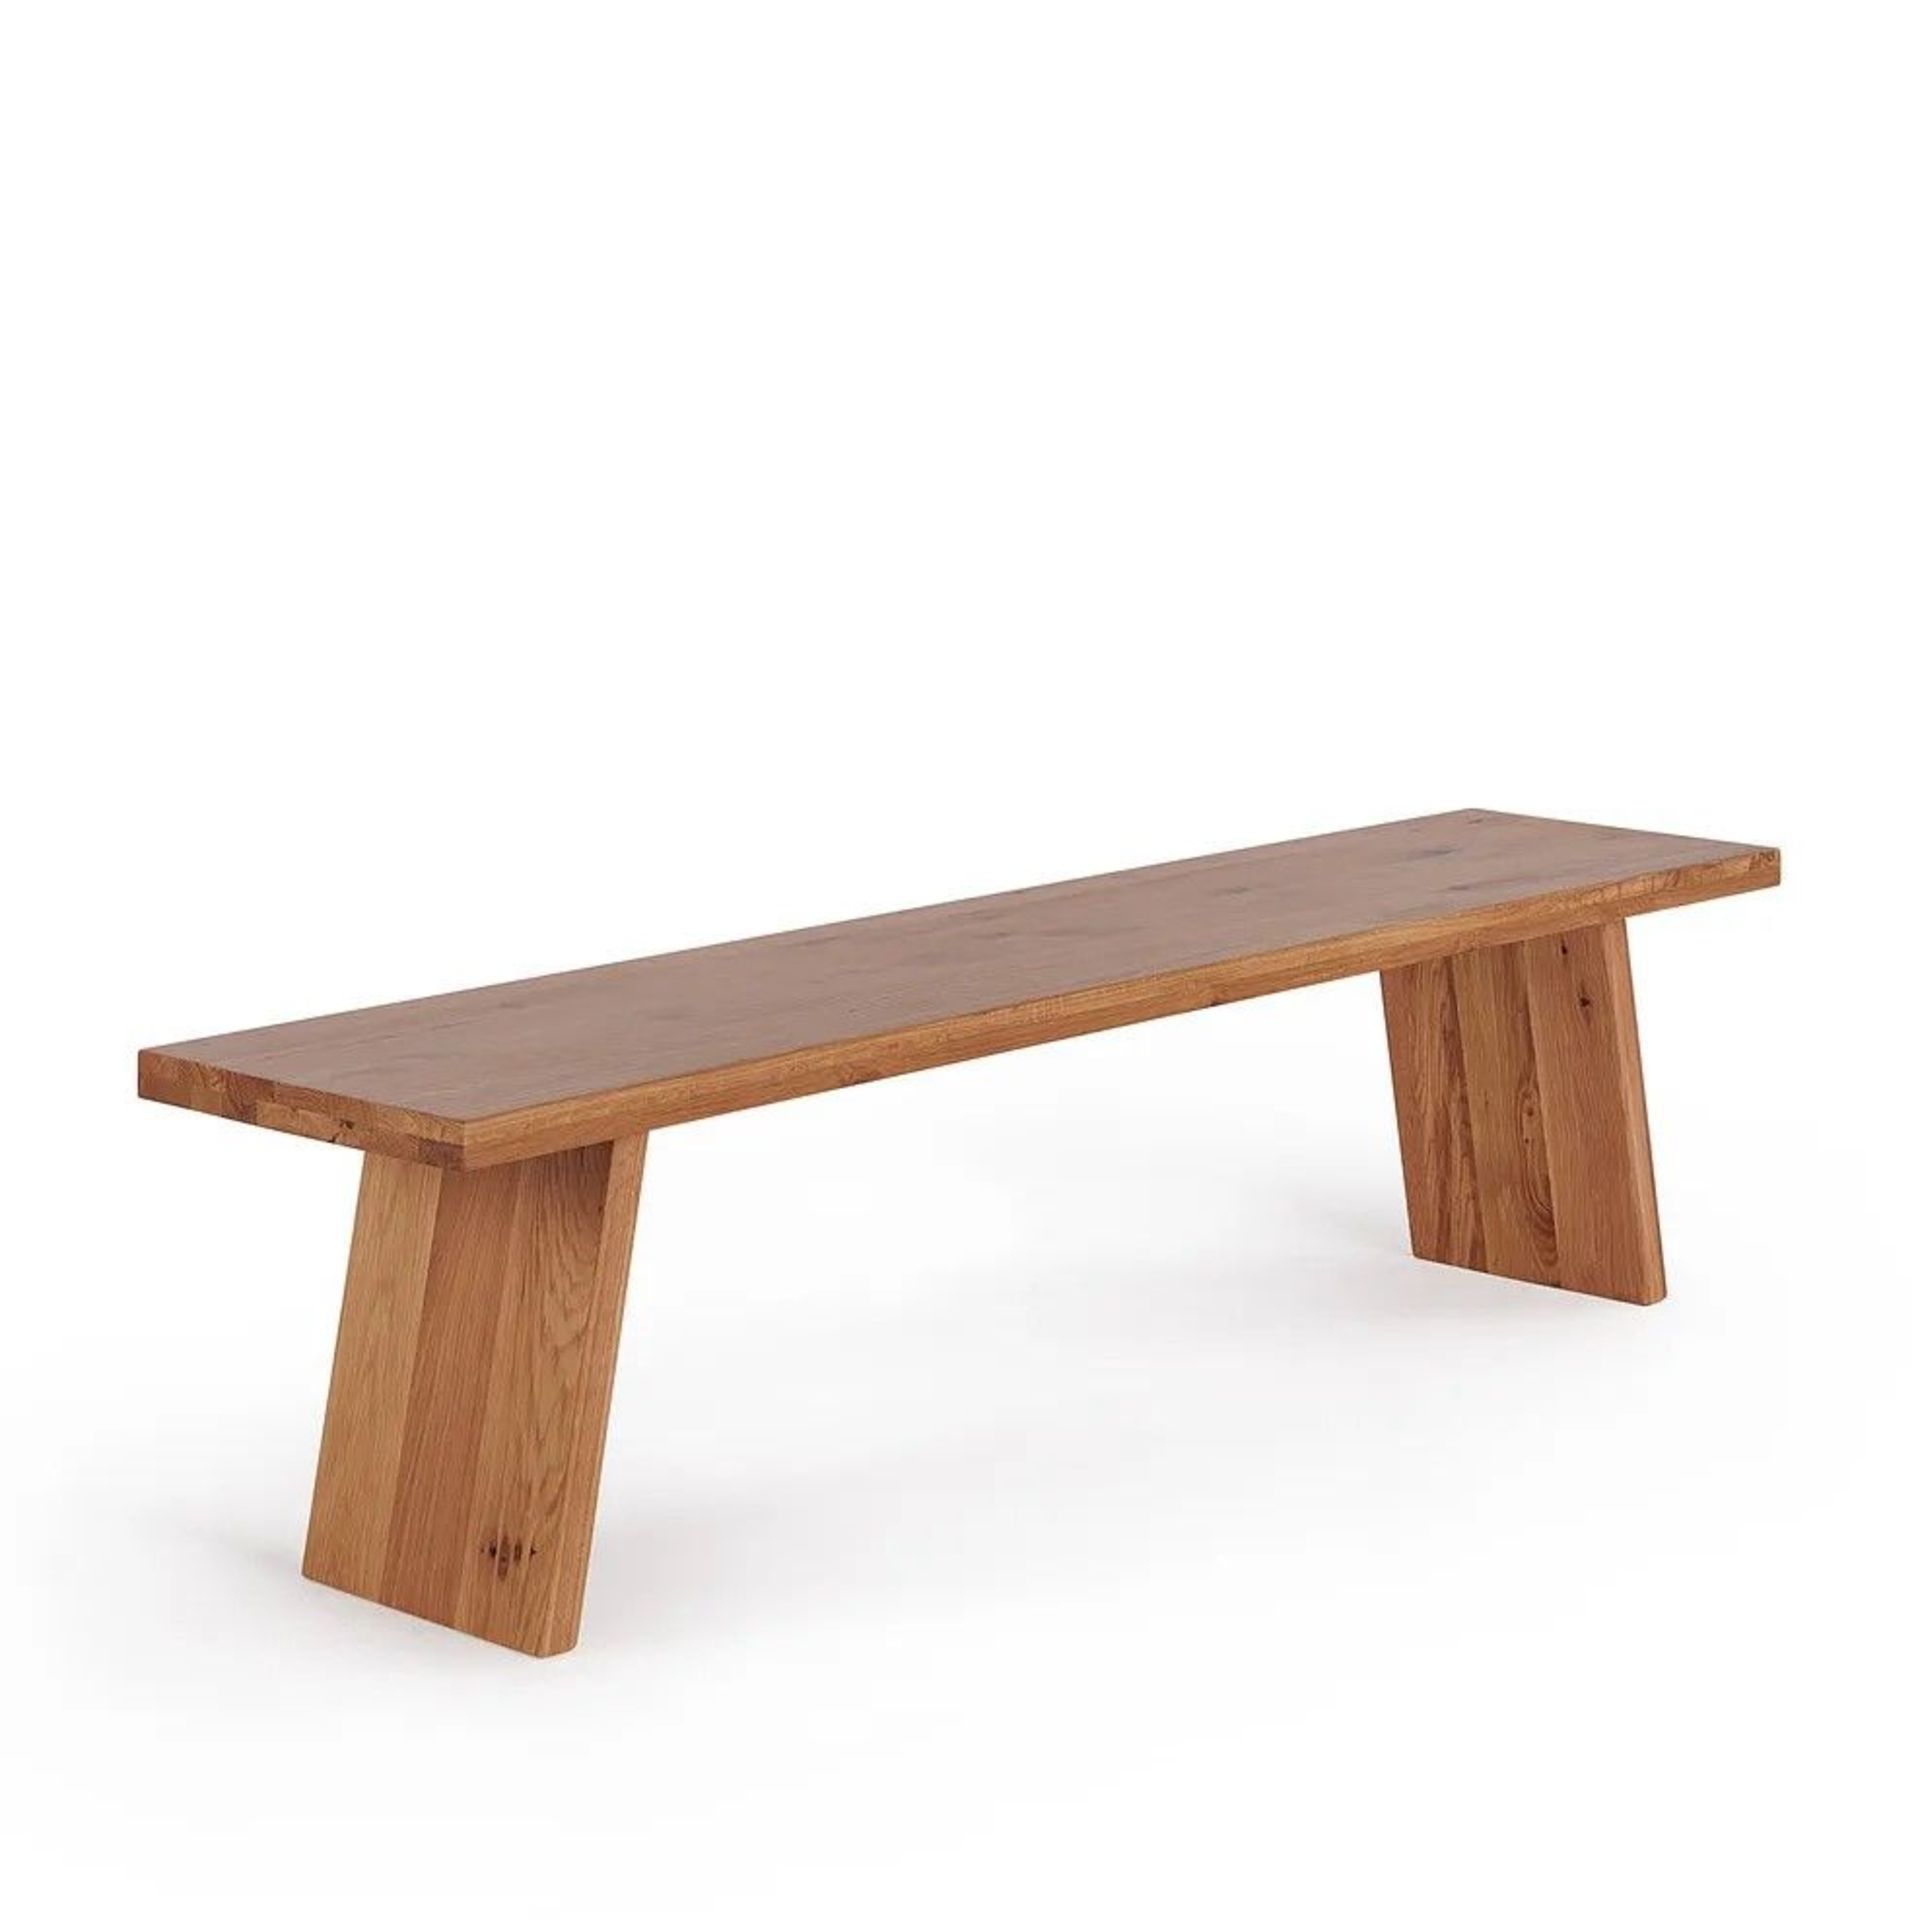 New Boxed - Cantilever Natural Solid Oak Bench. 180cm Long. RRP £330. For a more open seating